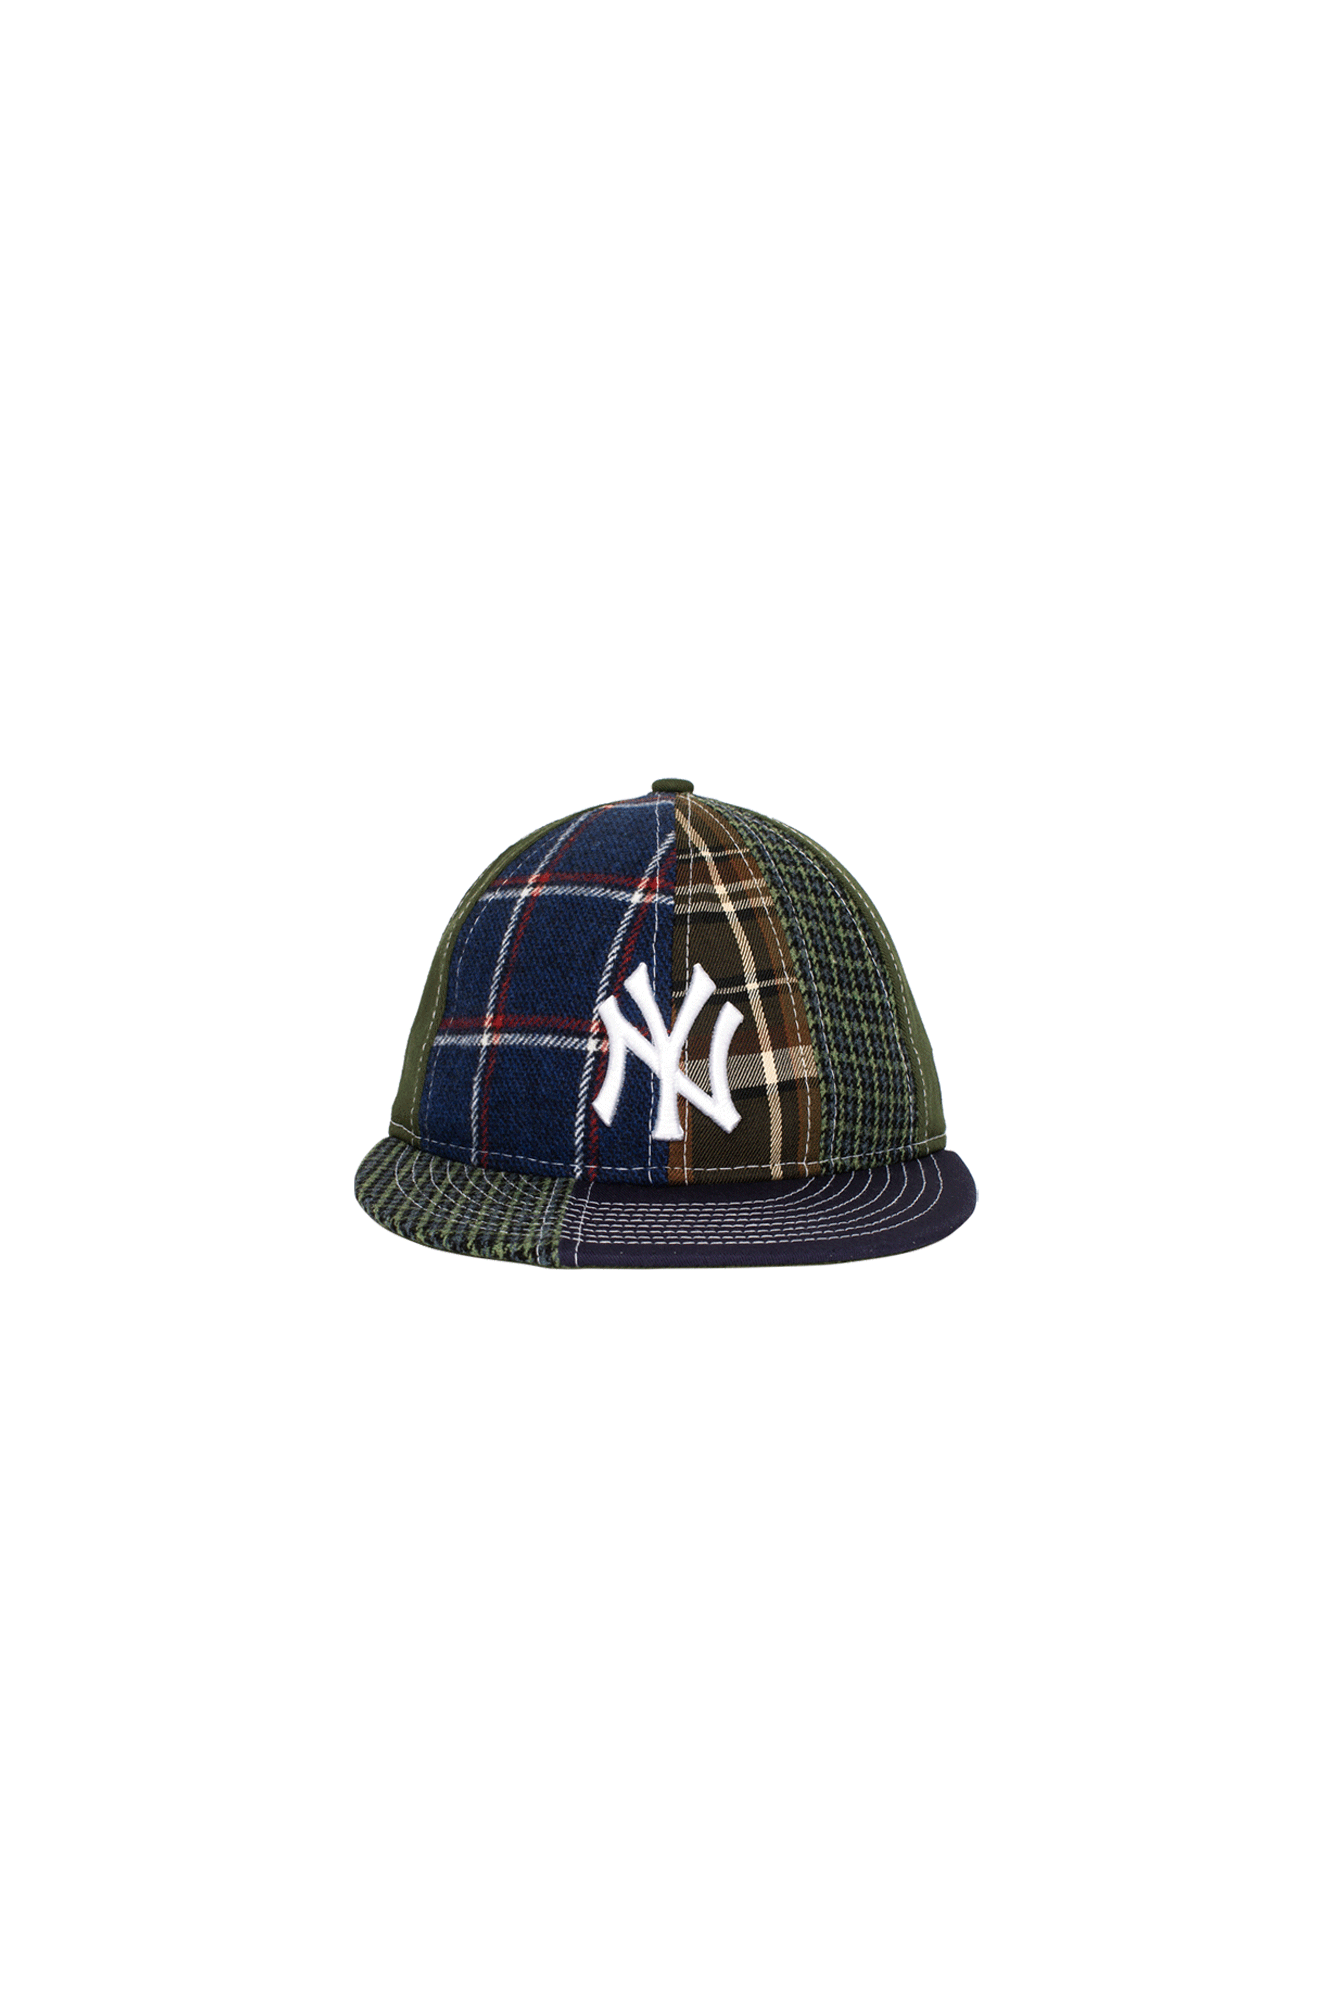 New York Yankees 9Fifty Patch Cap